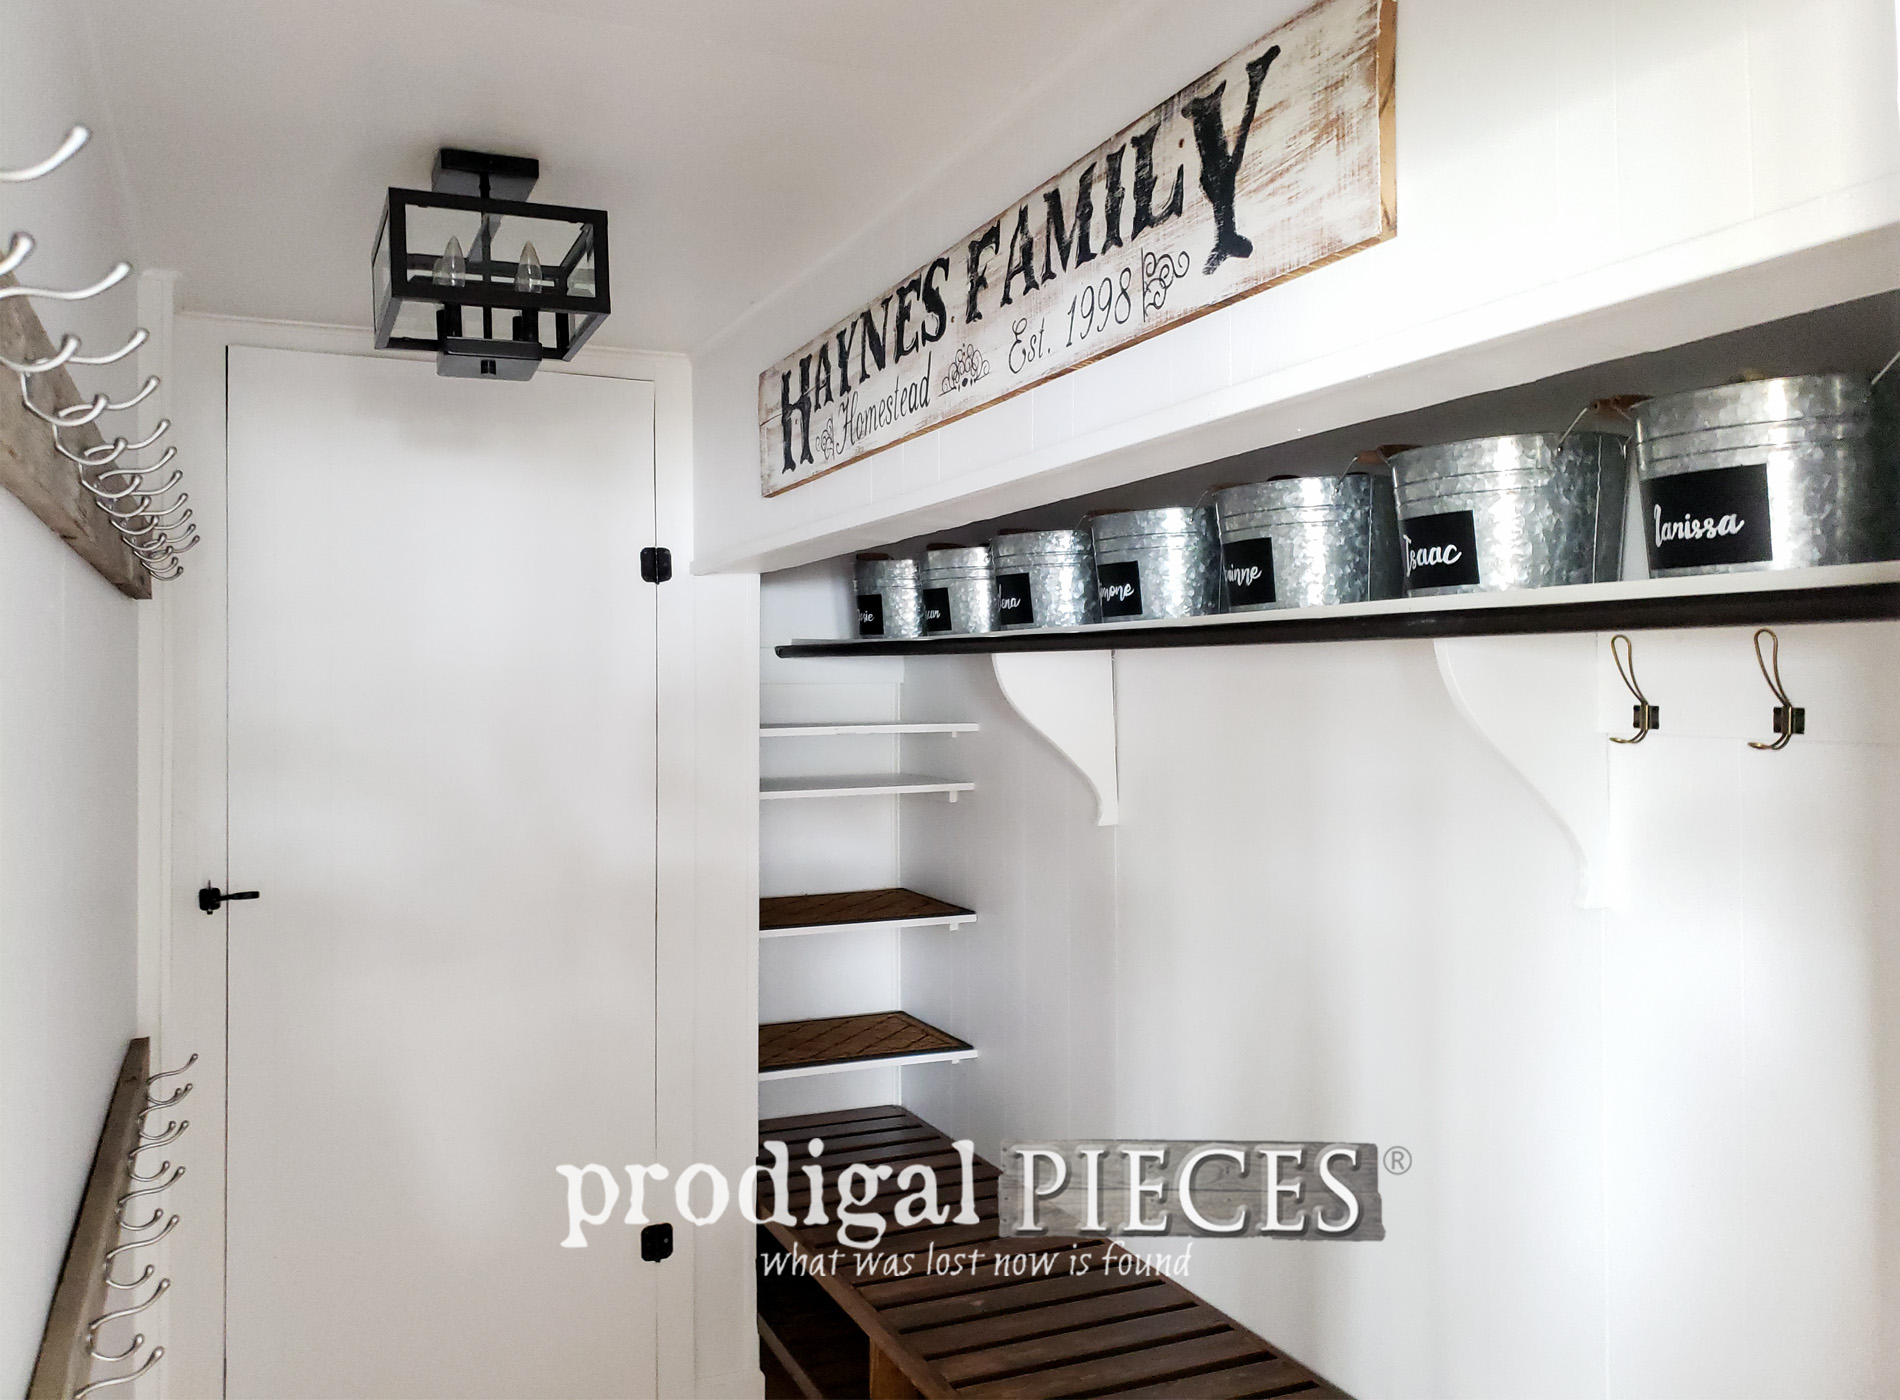 Featured Farmhouse Style Mudroom Update with DIY Shoe Storage by Larissa of Prodigal Pieces | prodigalpieces.com #prodigalpieces #diy #home #storage #homedecor #homeimprovement